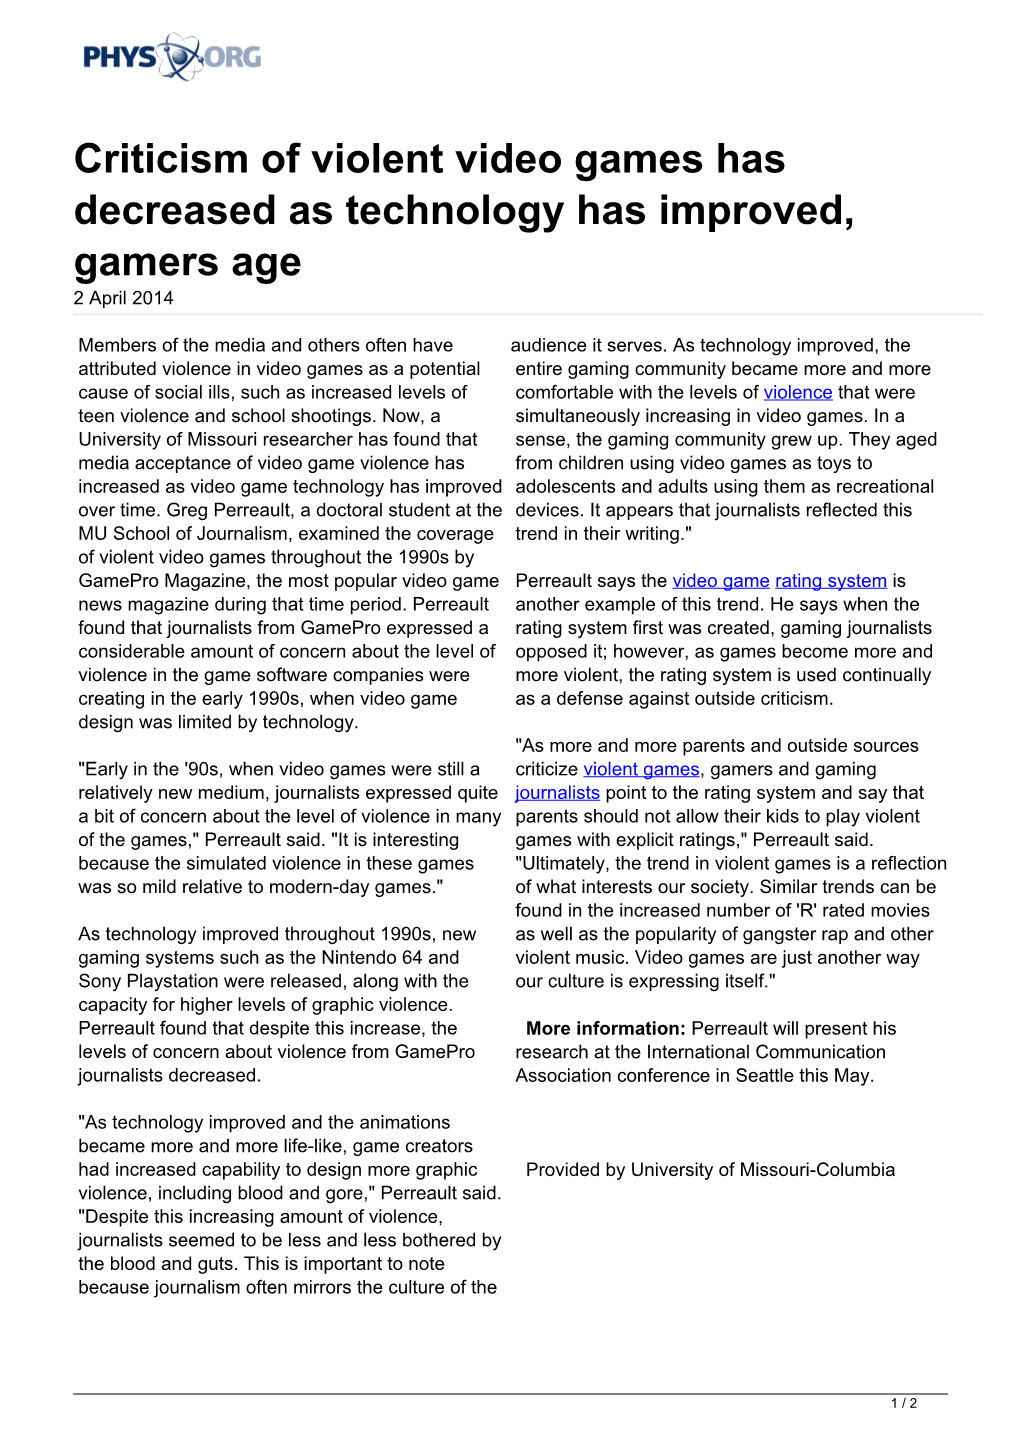 Criticism of Violent Video Games Has Decreased As Technology Has Improved, Gamers Age 2 April 2014